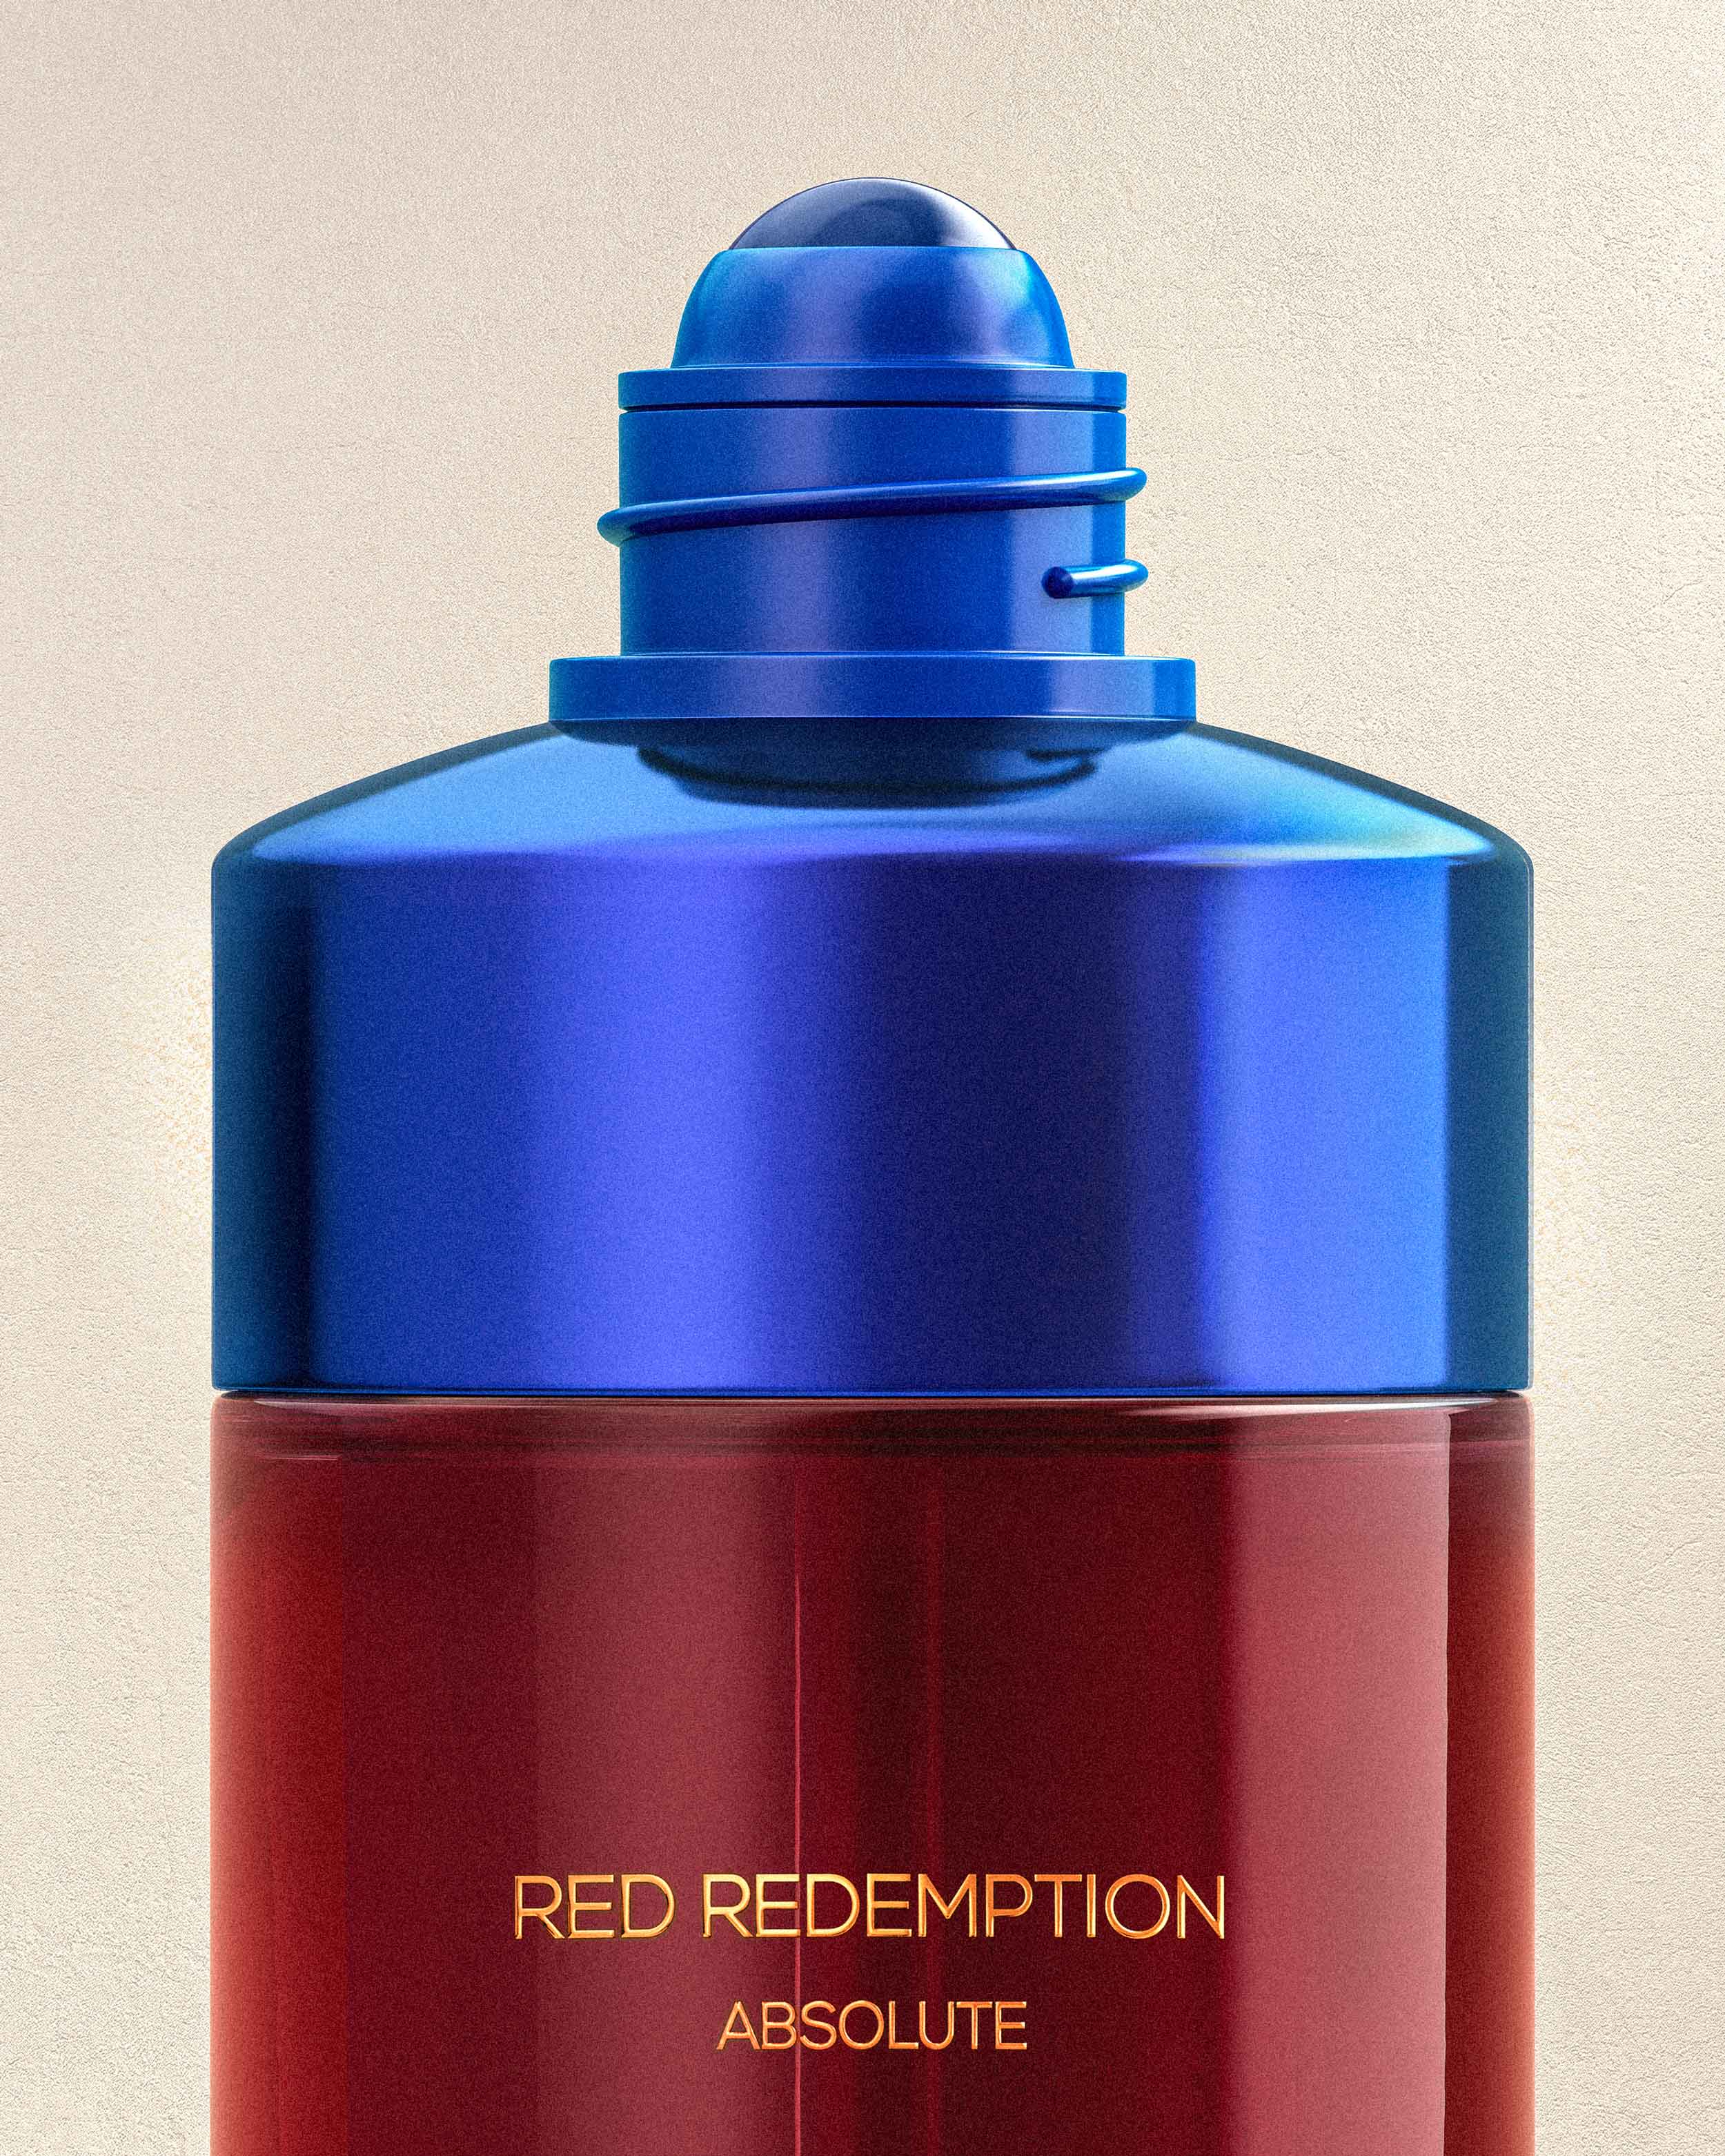 OJAR Absolute Red Redemption Perfume Roll-on